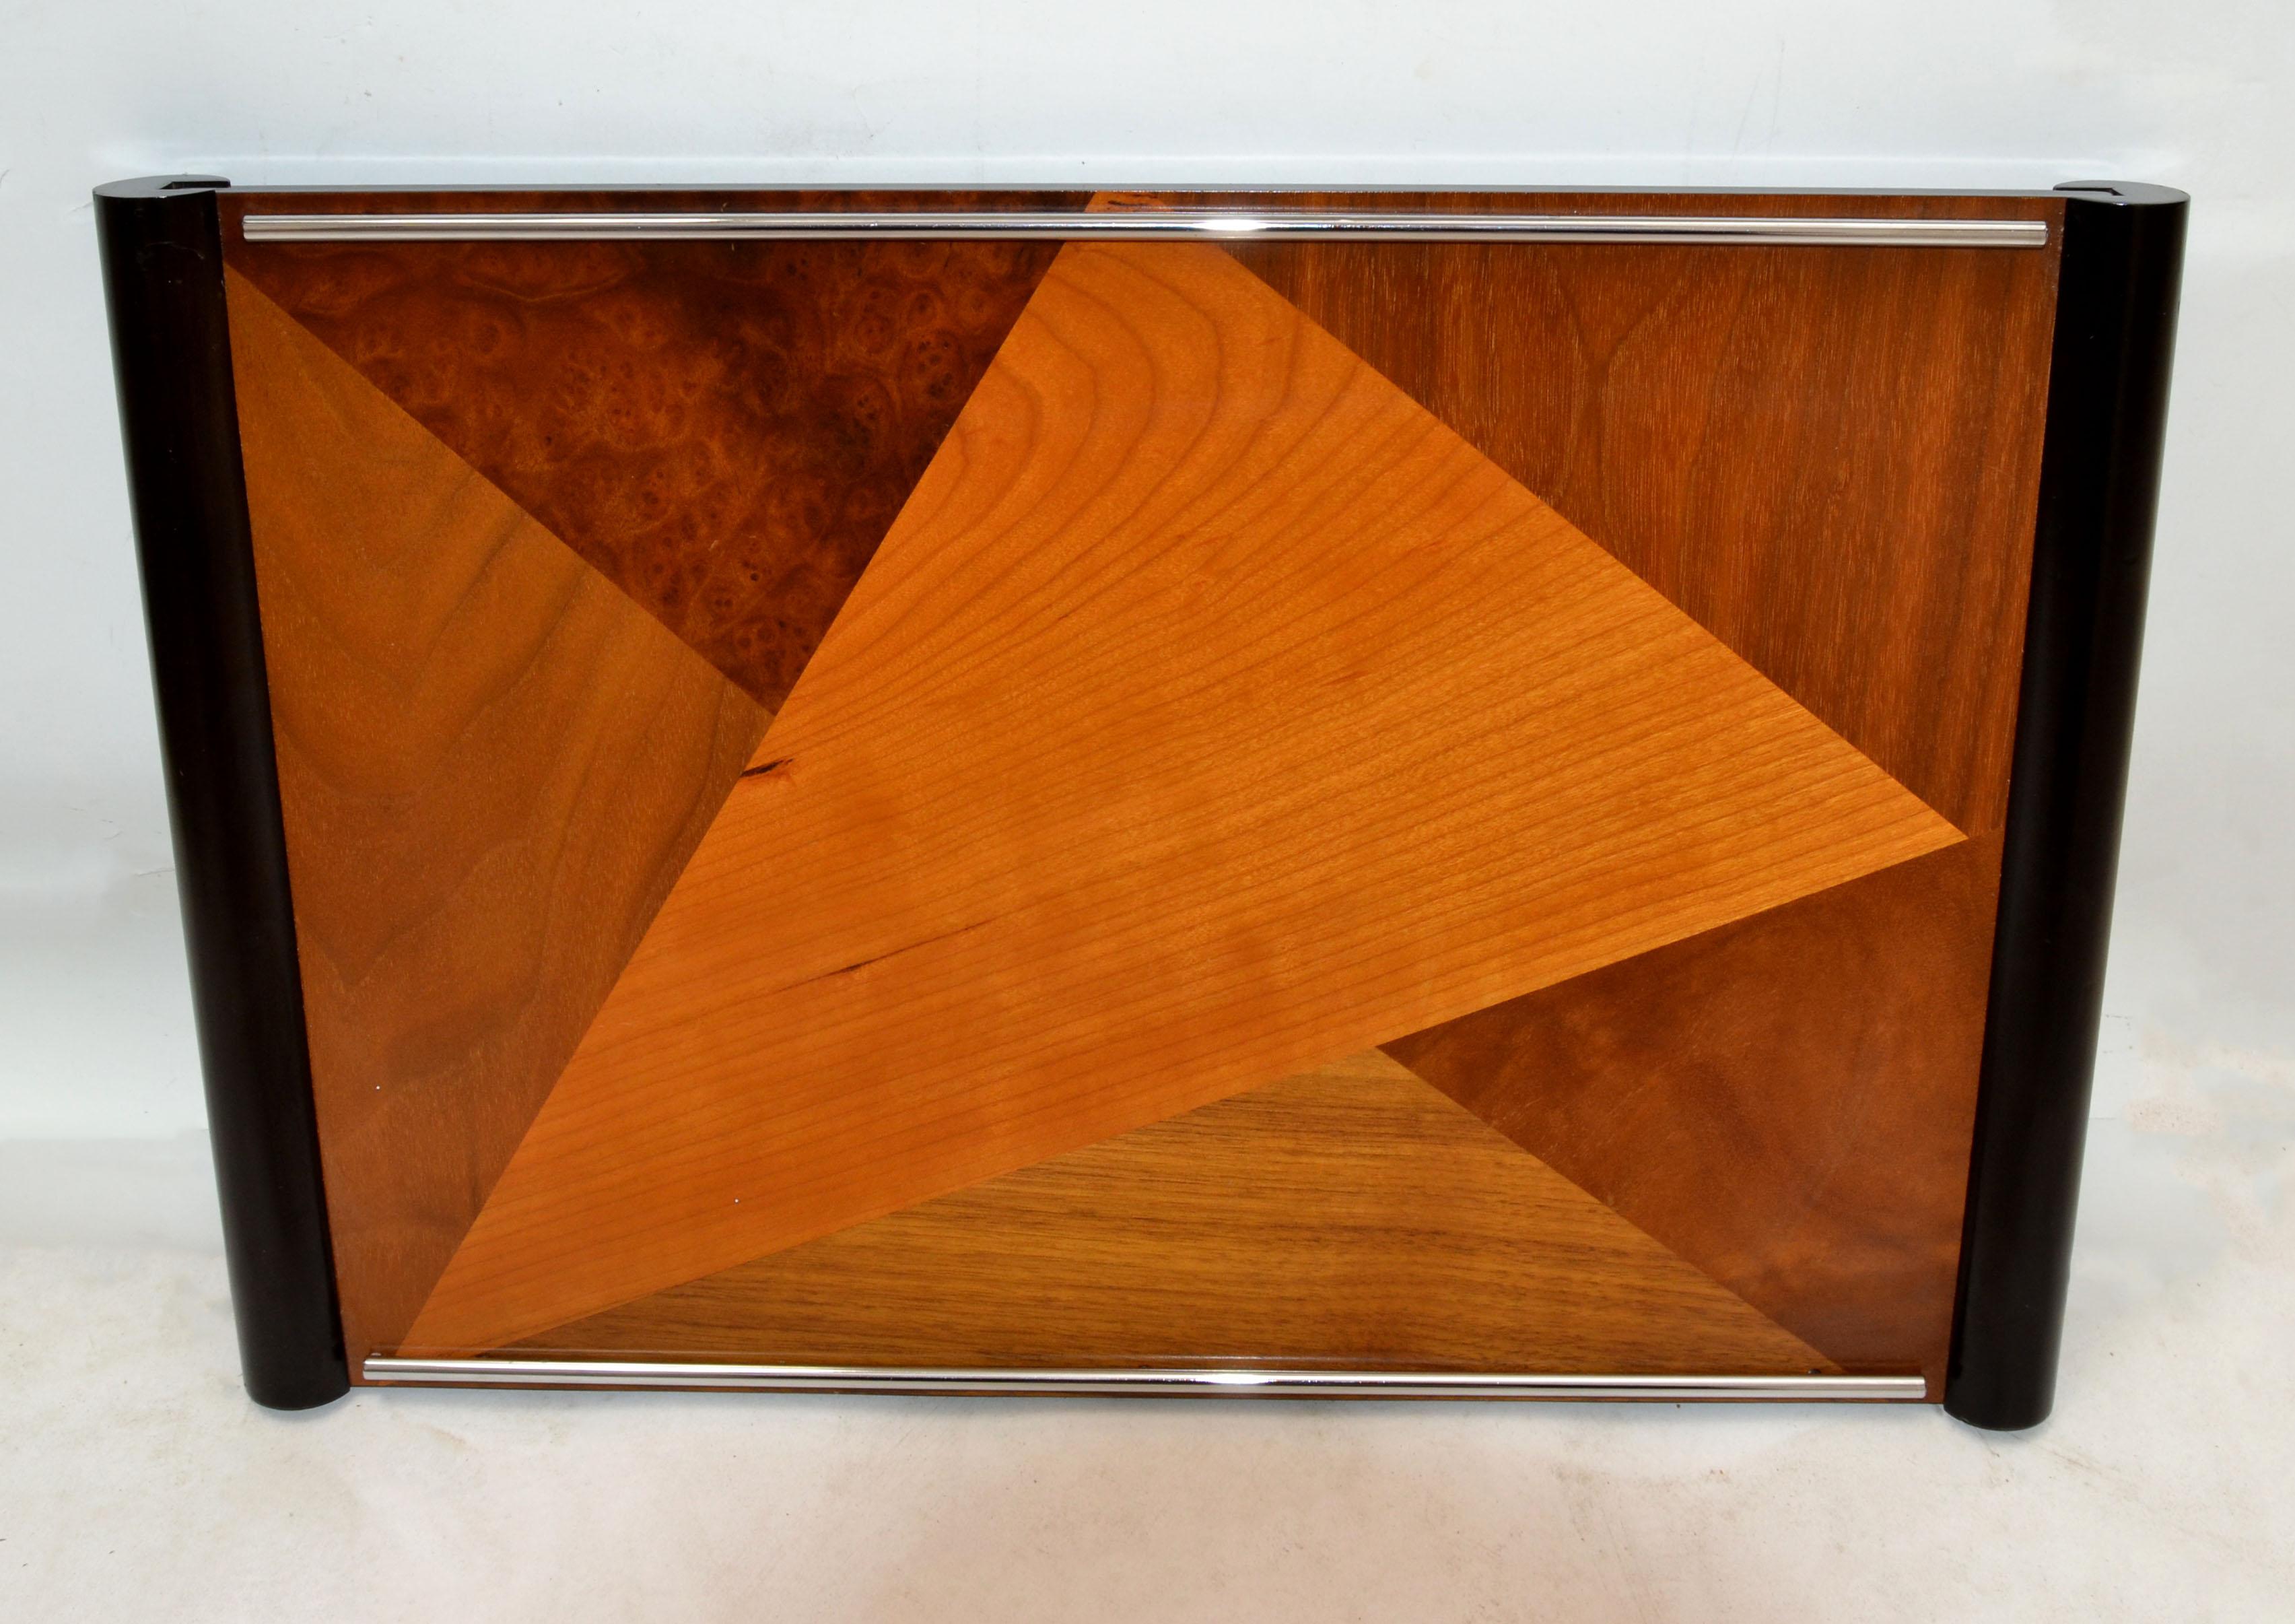 Hand-Crafted American Organic Modern Handcrafted Hardwood Marquetry Decorative Serving Tray For Sale